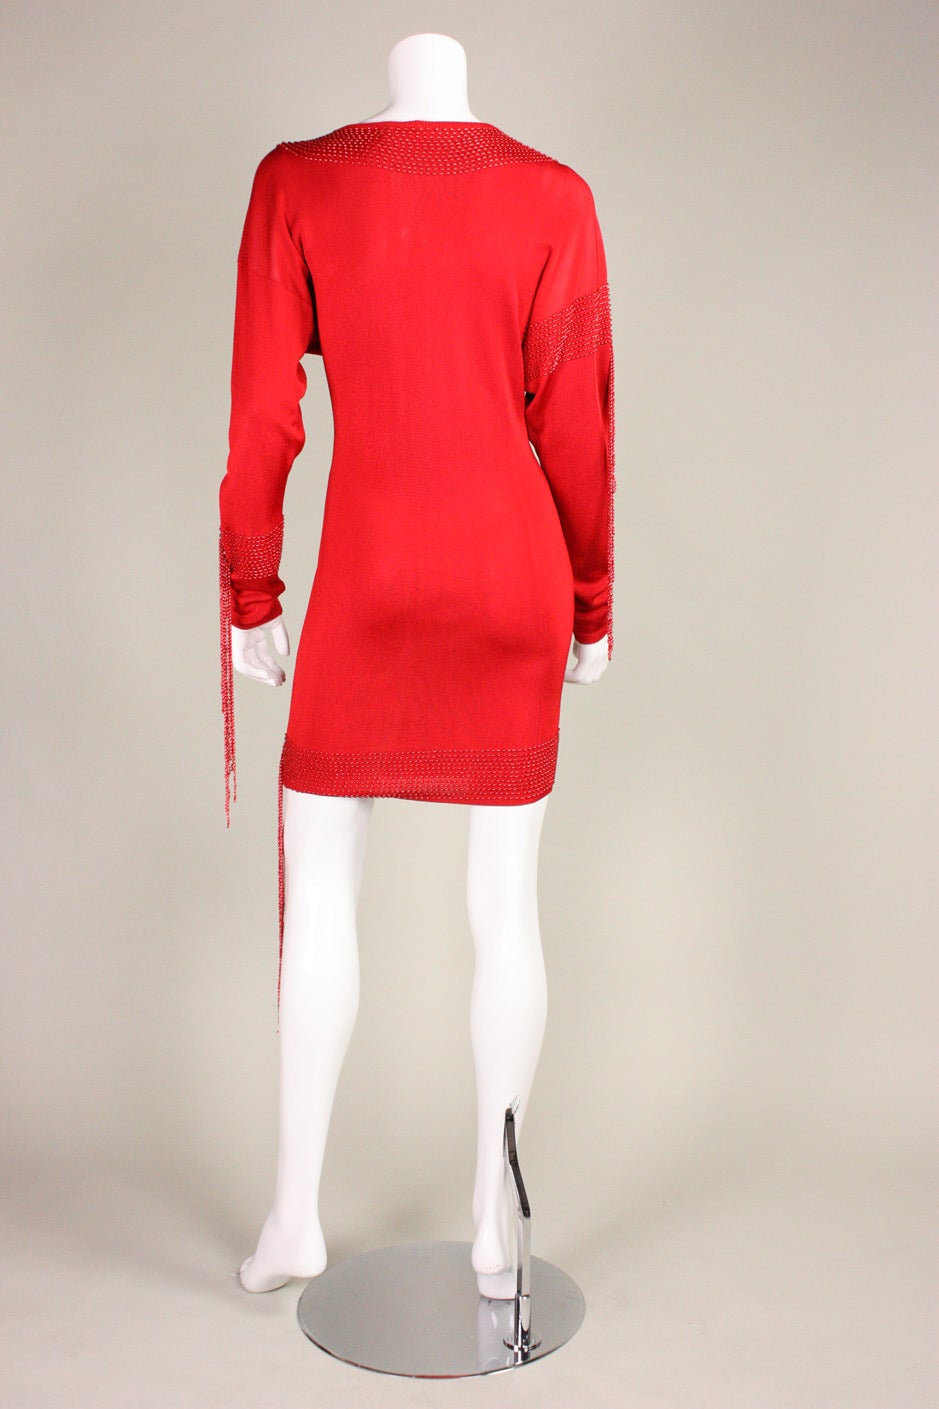 Women's 1980's Krizia Red Knit Dress with Beading For Sale